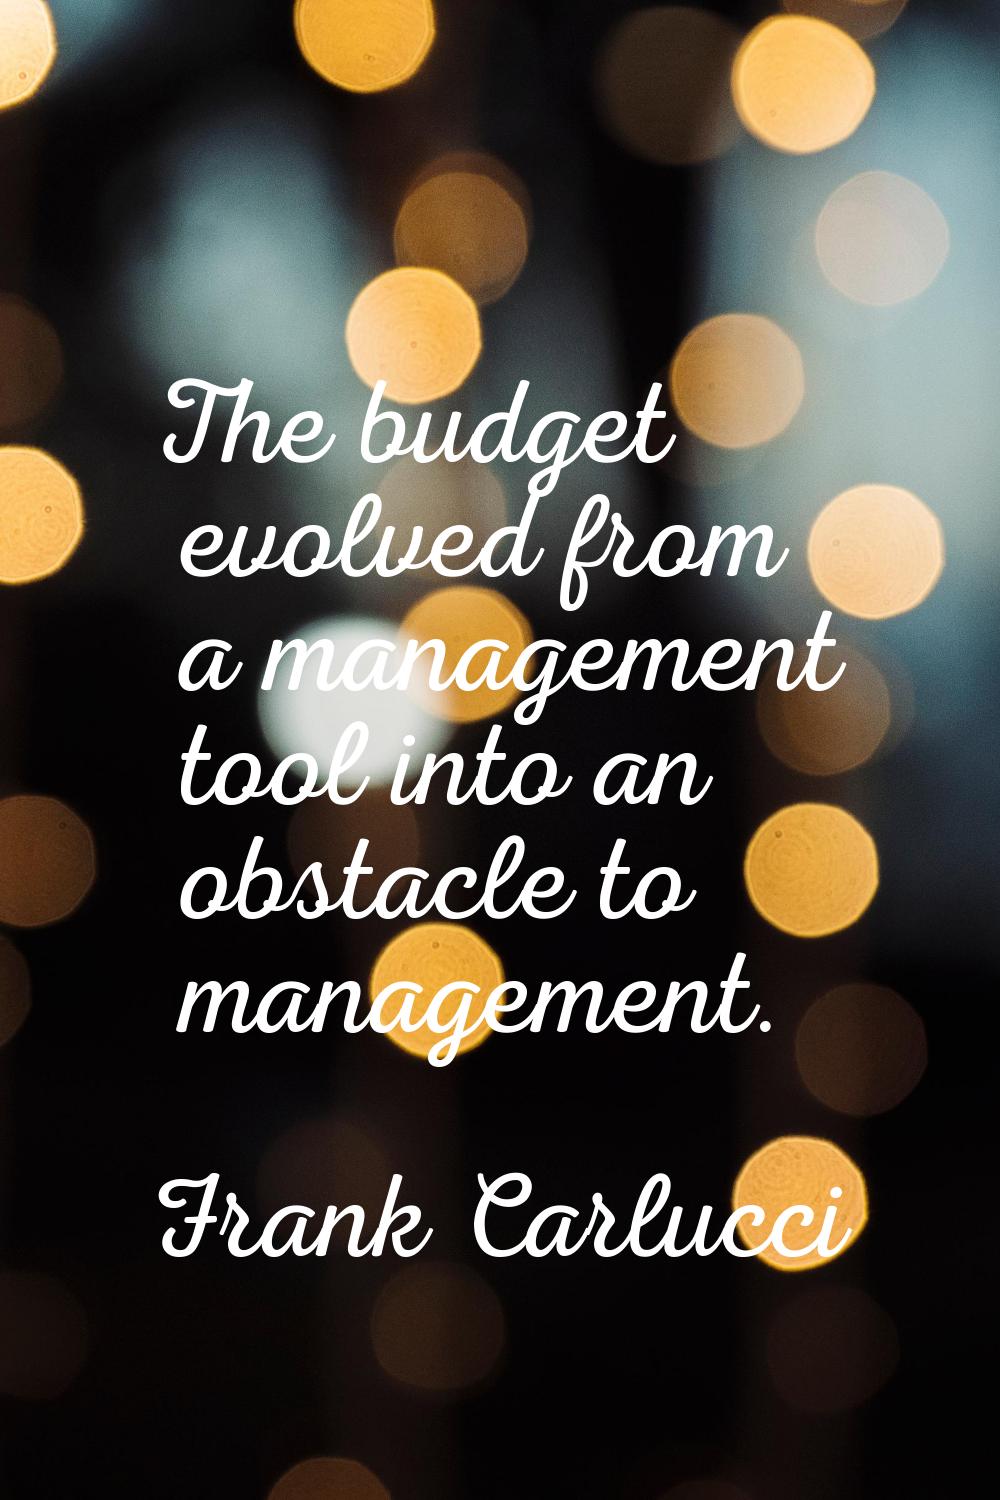 The budget evolved from a management tool into an obstacle to management.